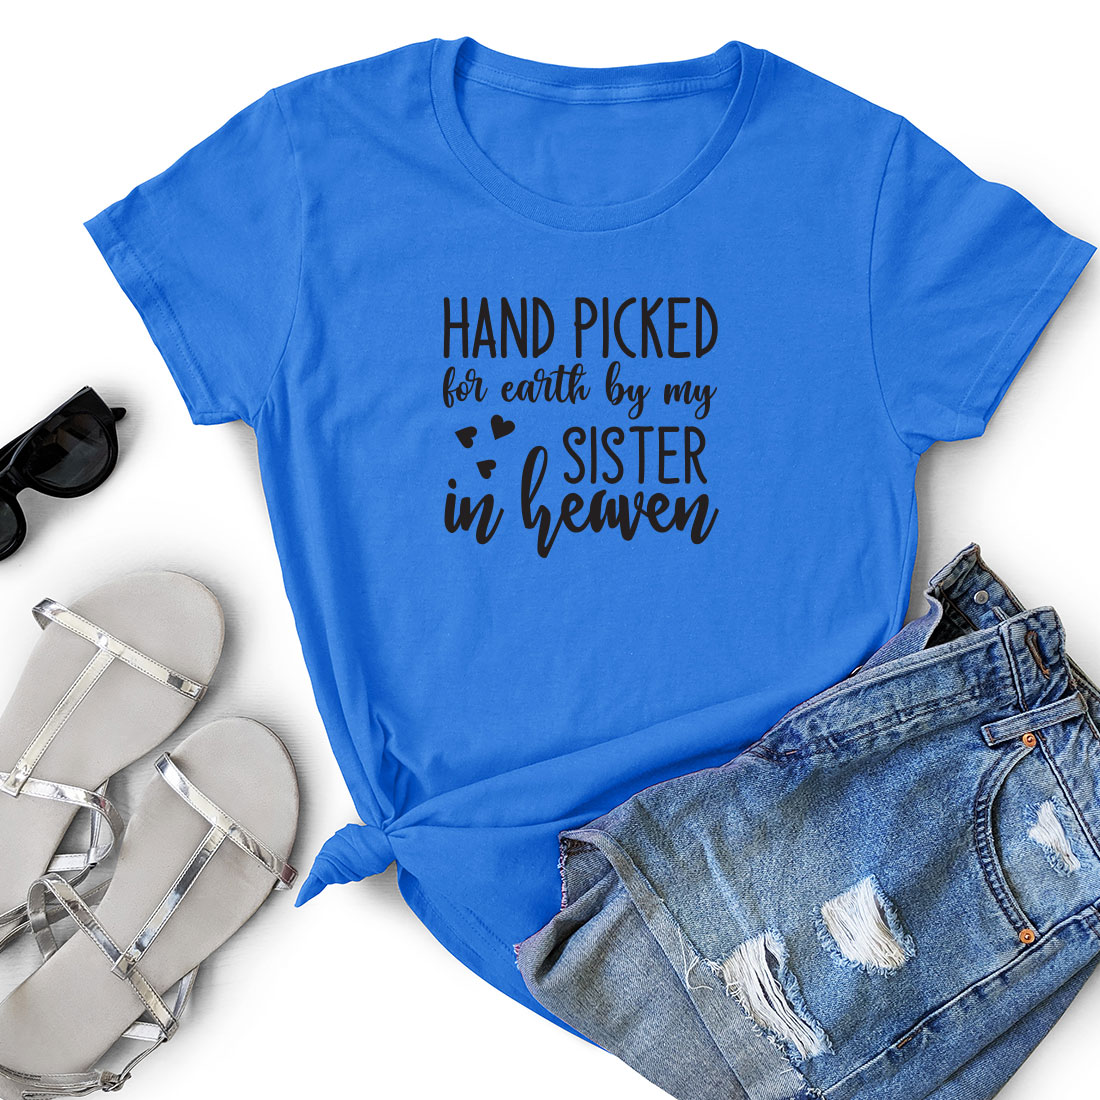 T - shirt that says hand picked for each by my sister in heaven.